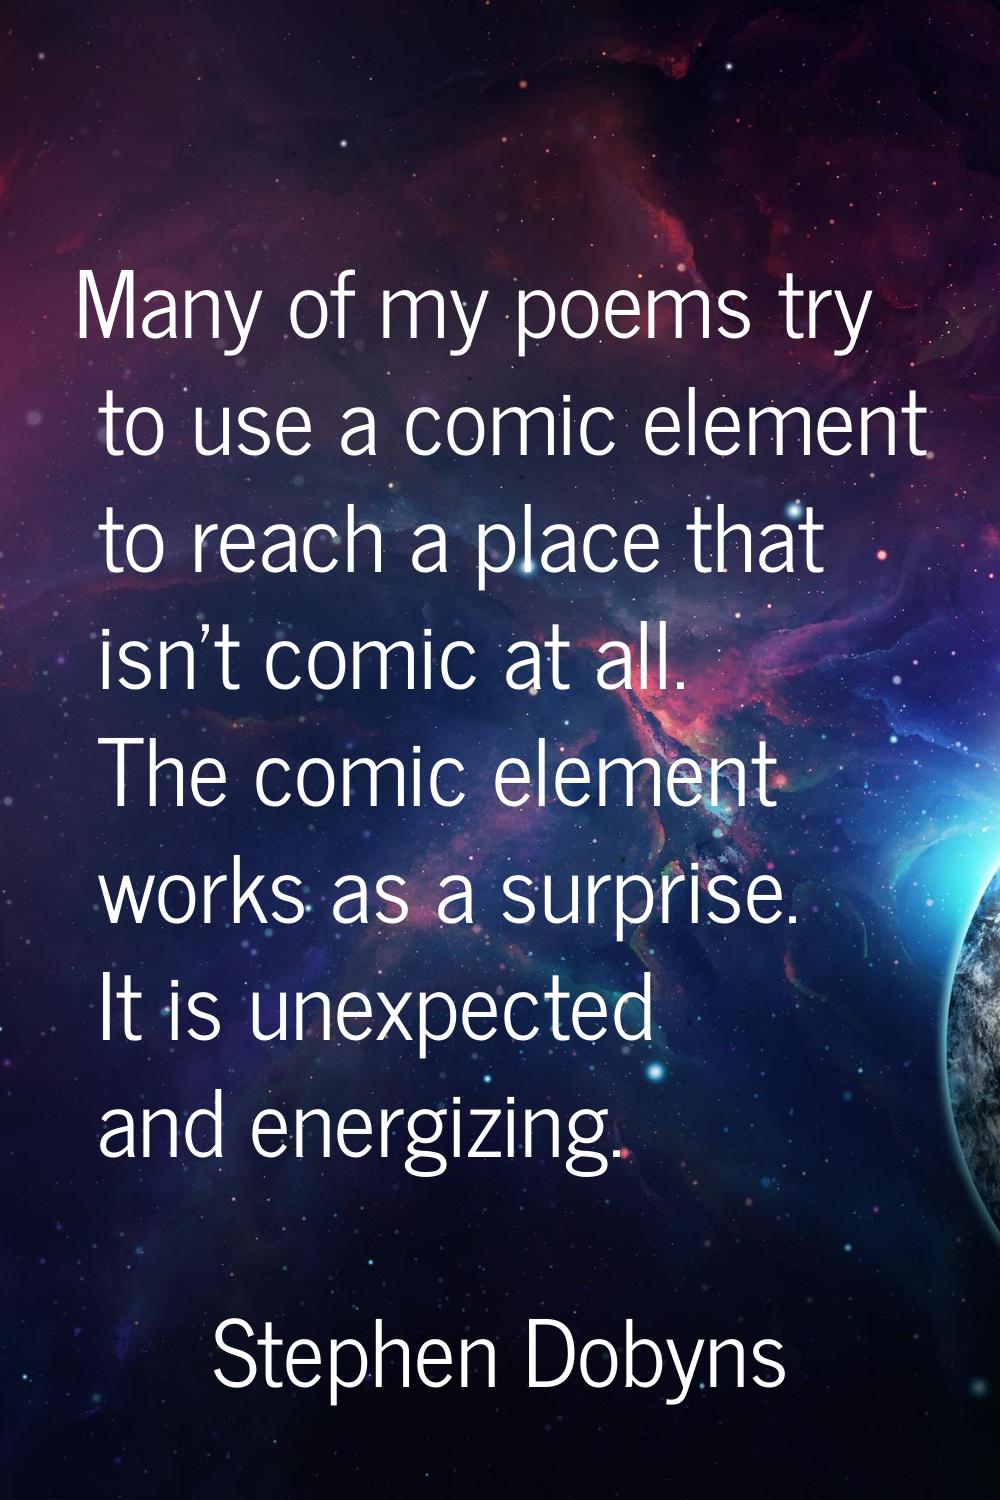 Many of my poems try to use a comic element to reach a place that isn't comic at all. The comic ele